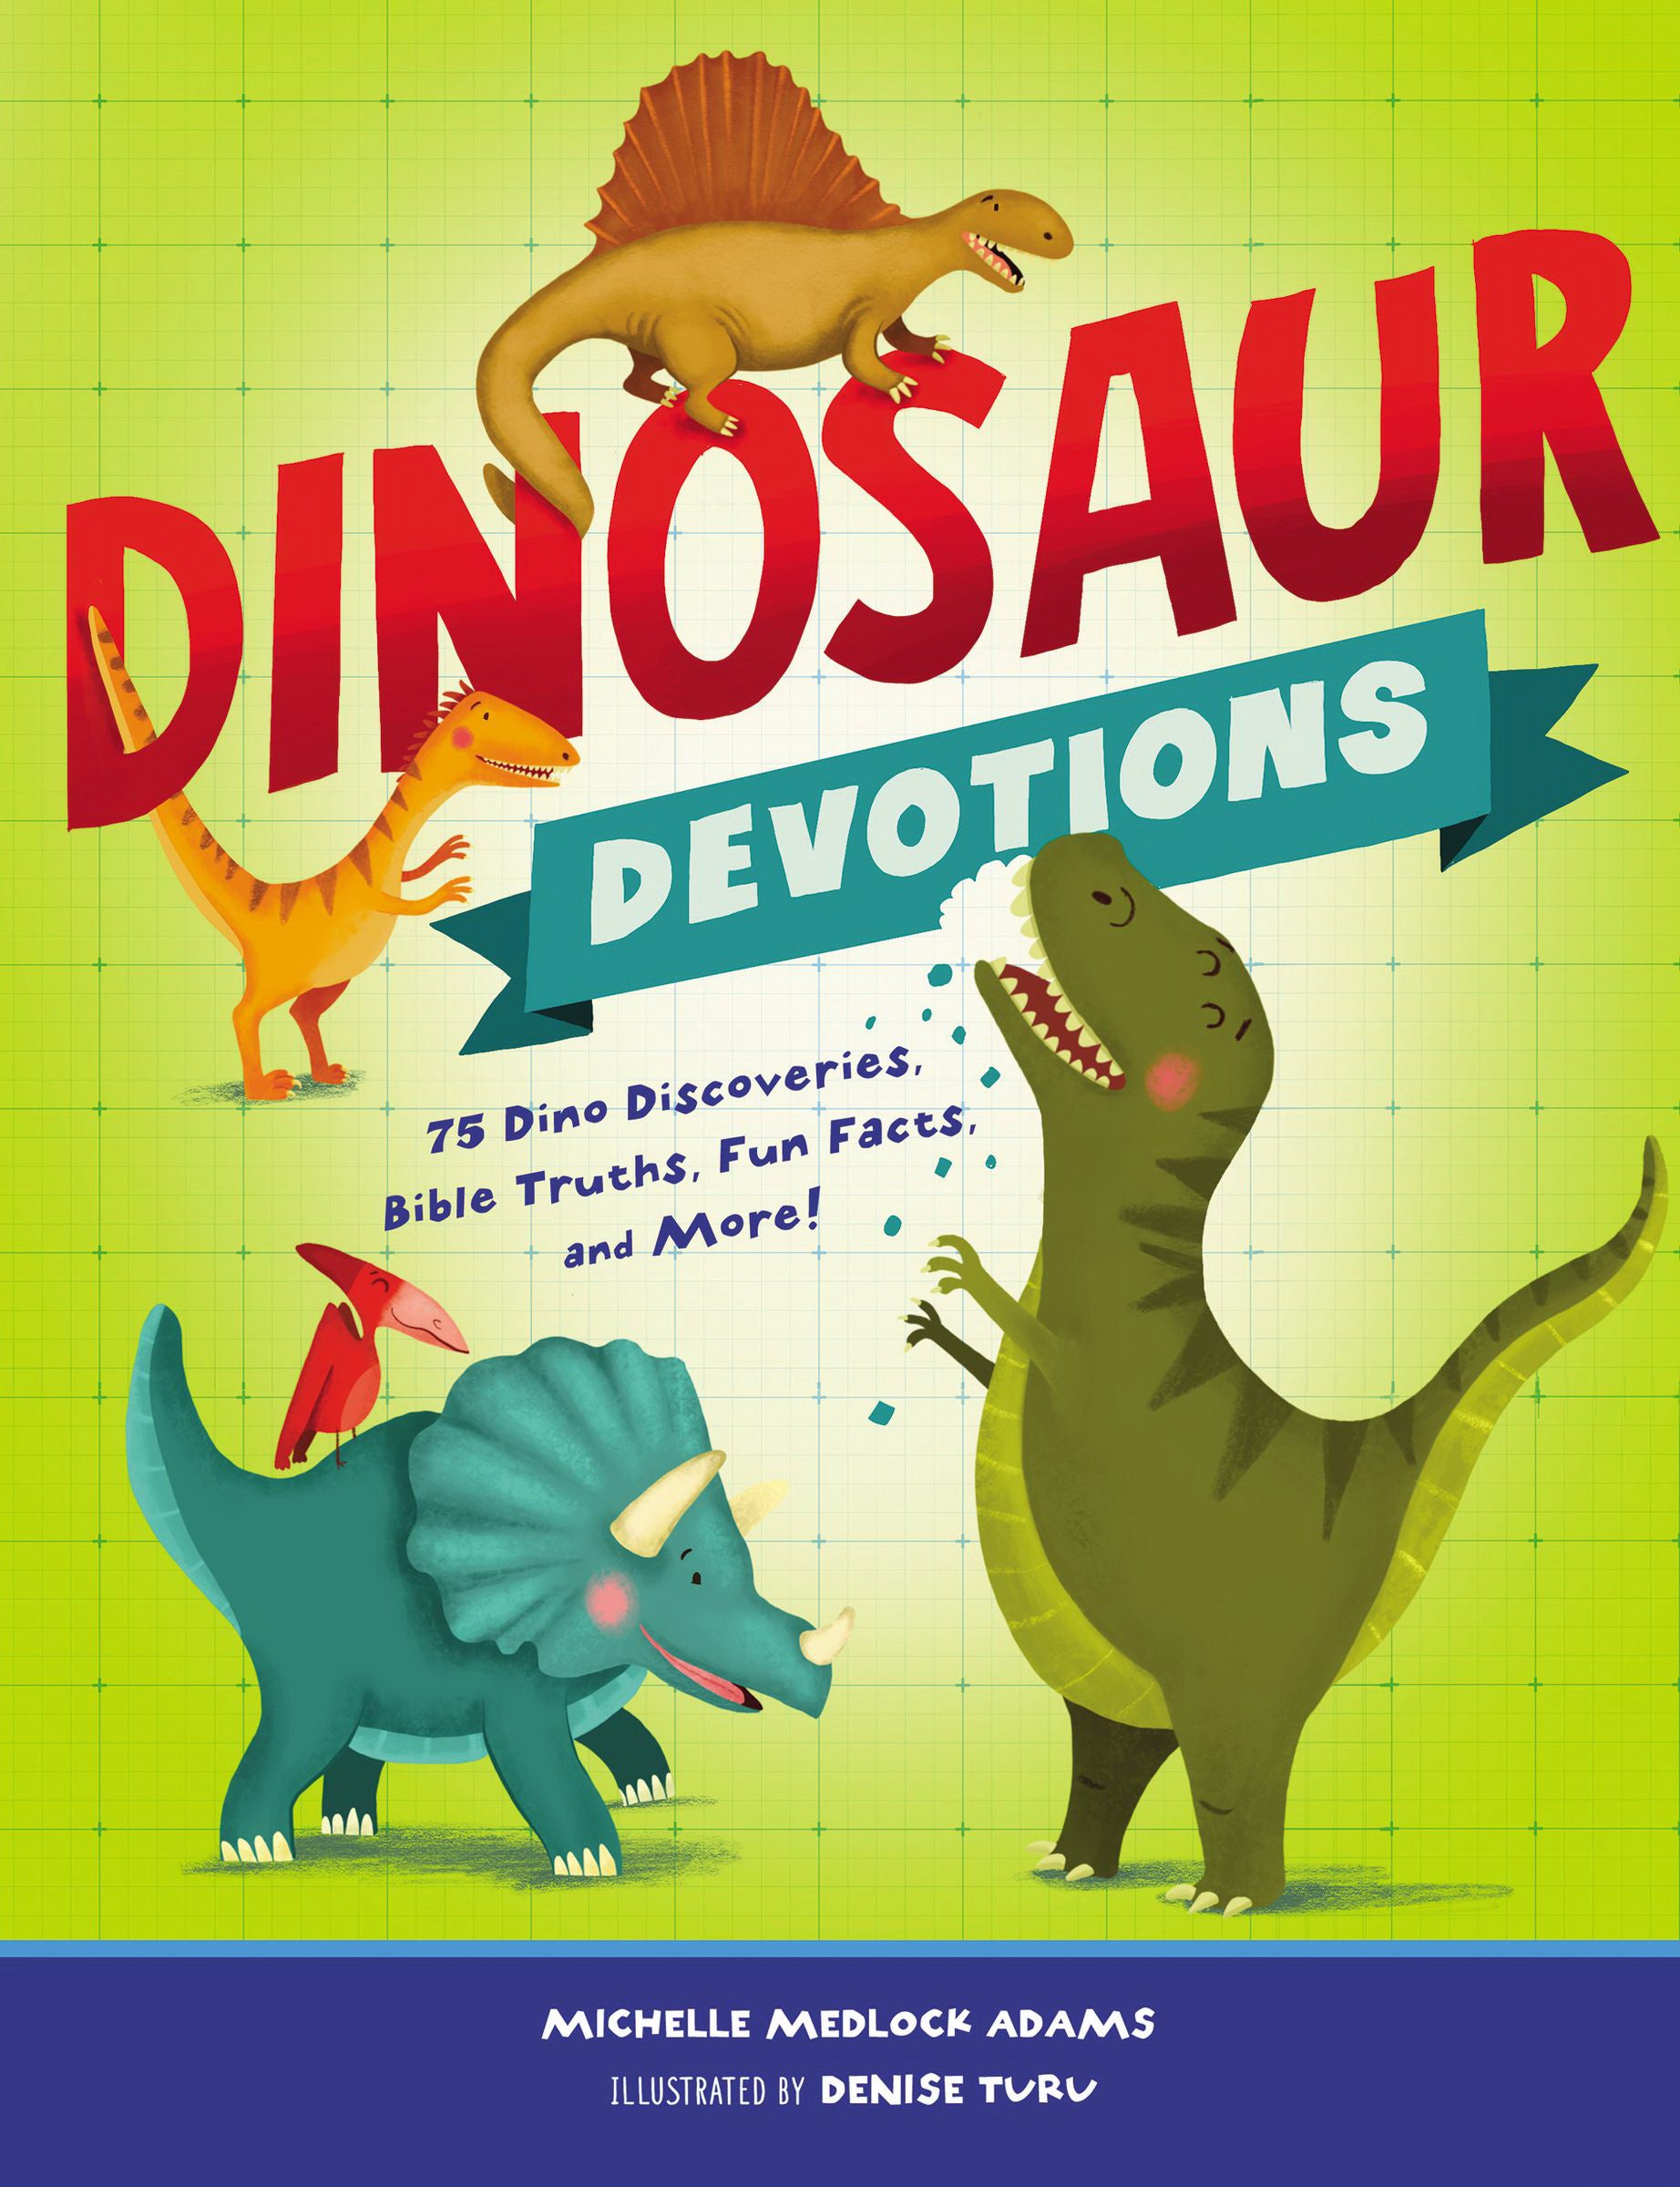 Image of Dinosaur Devotions other